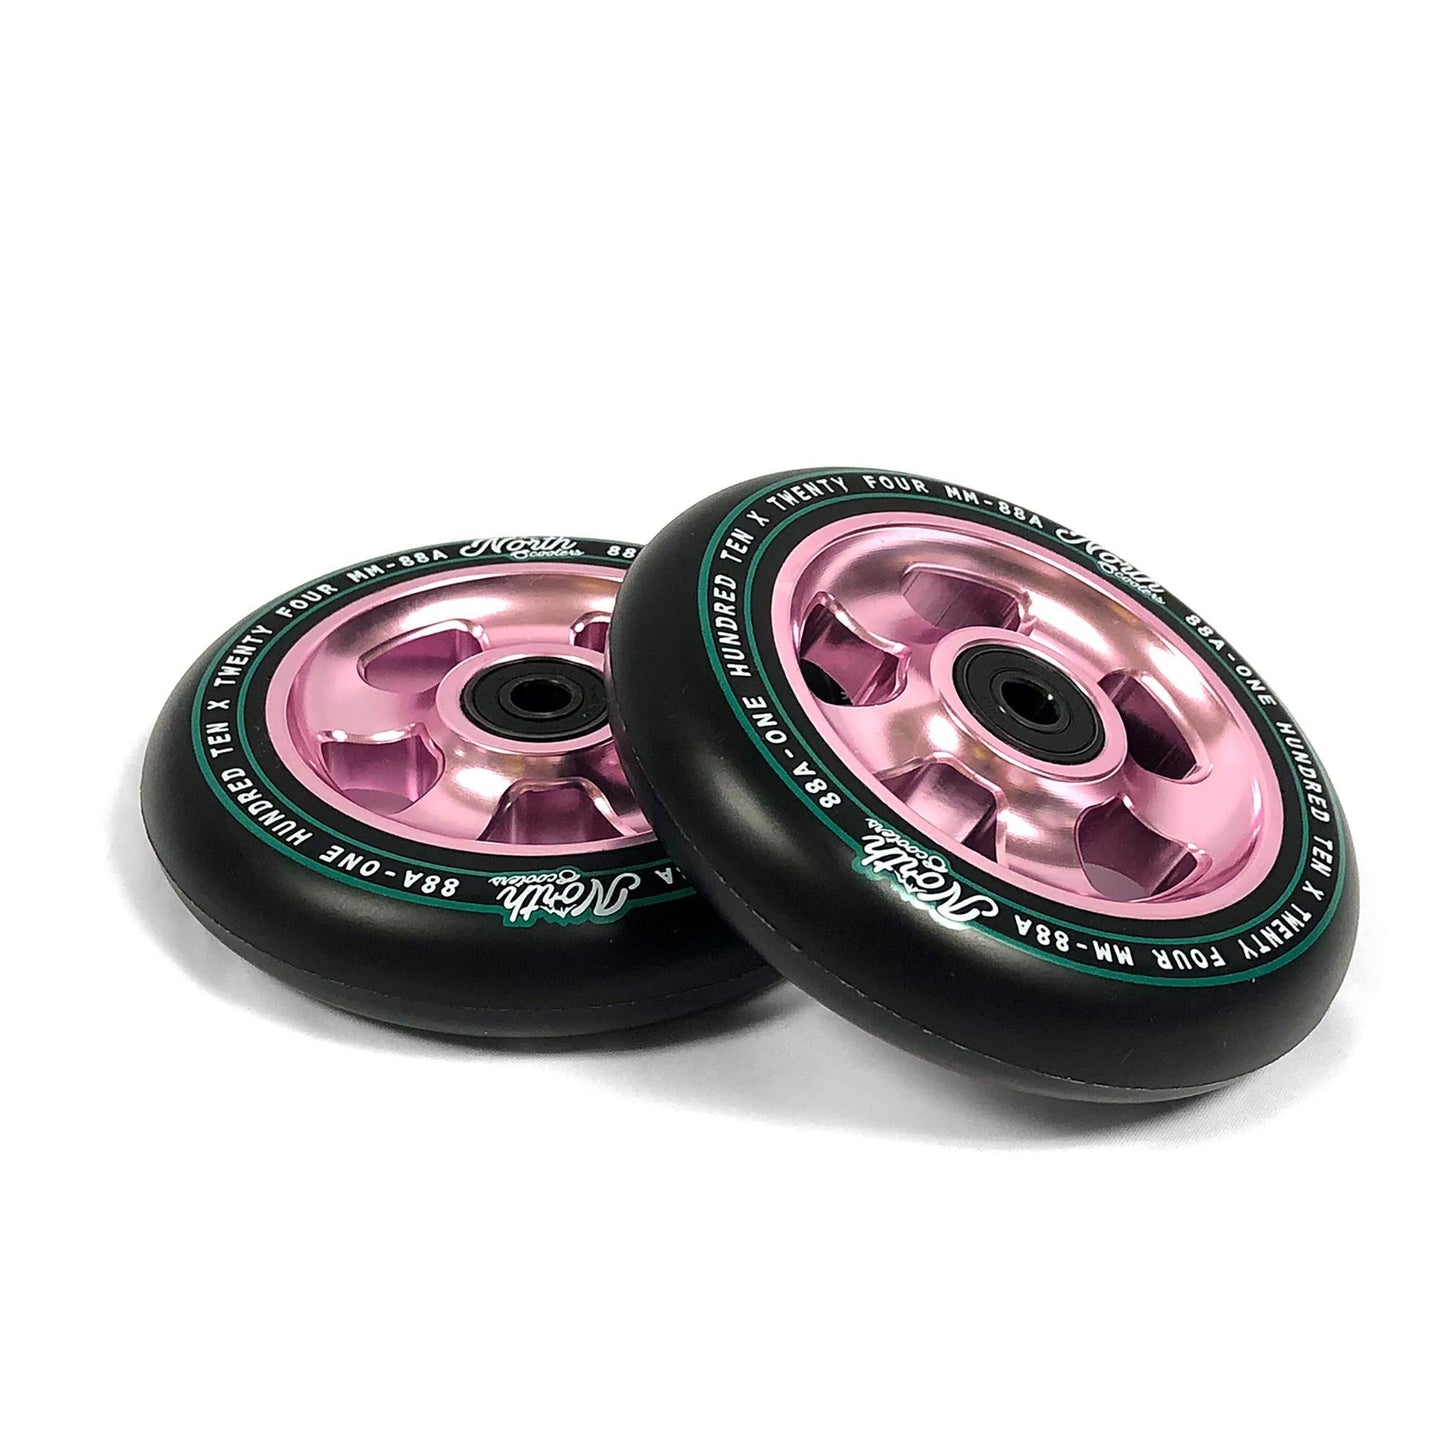 North Scooters HQ Wheel 110mm - Pair